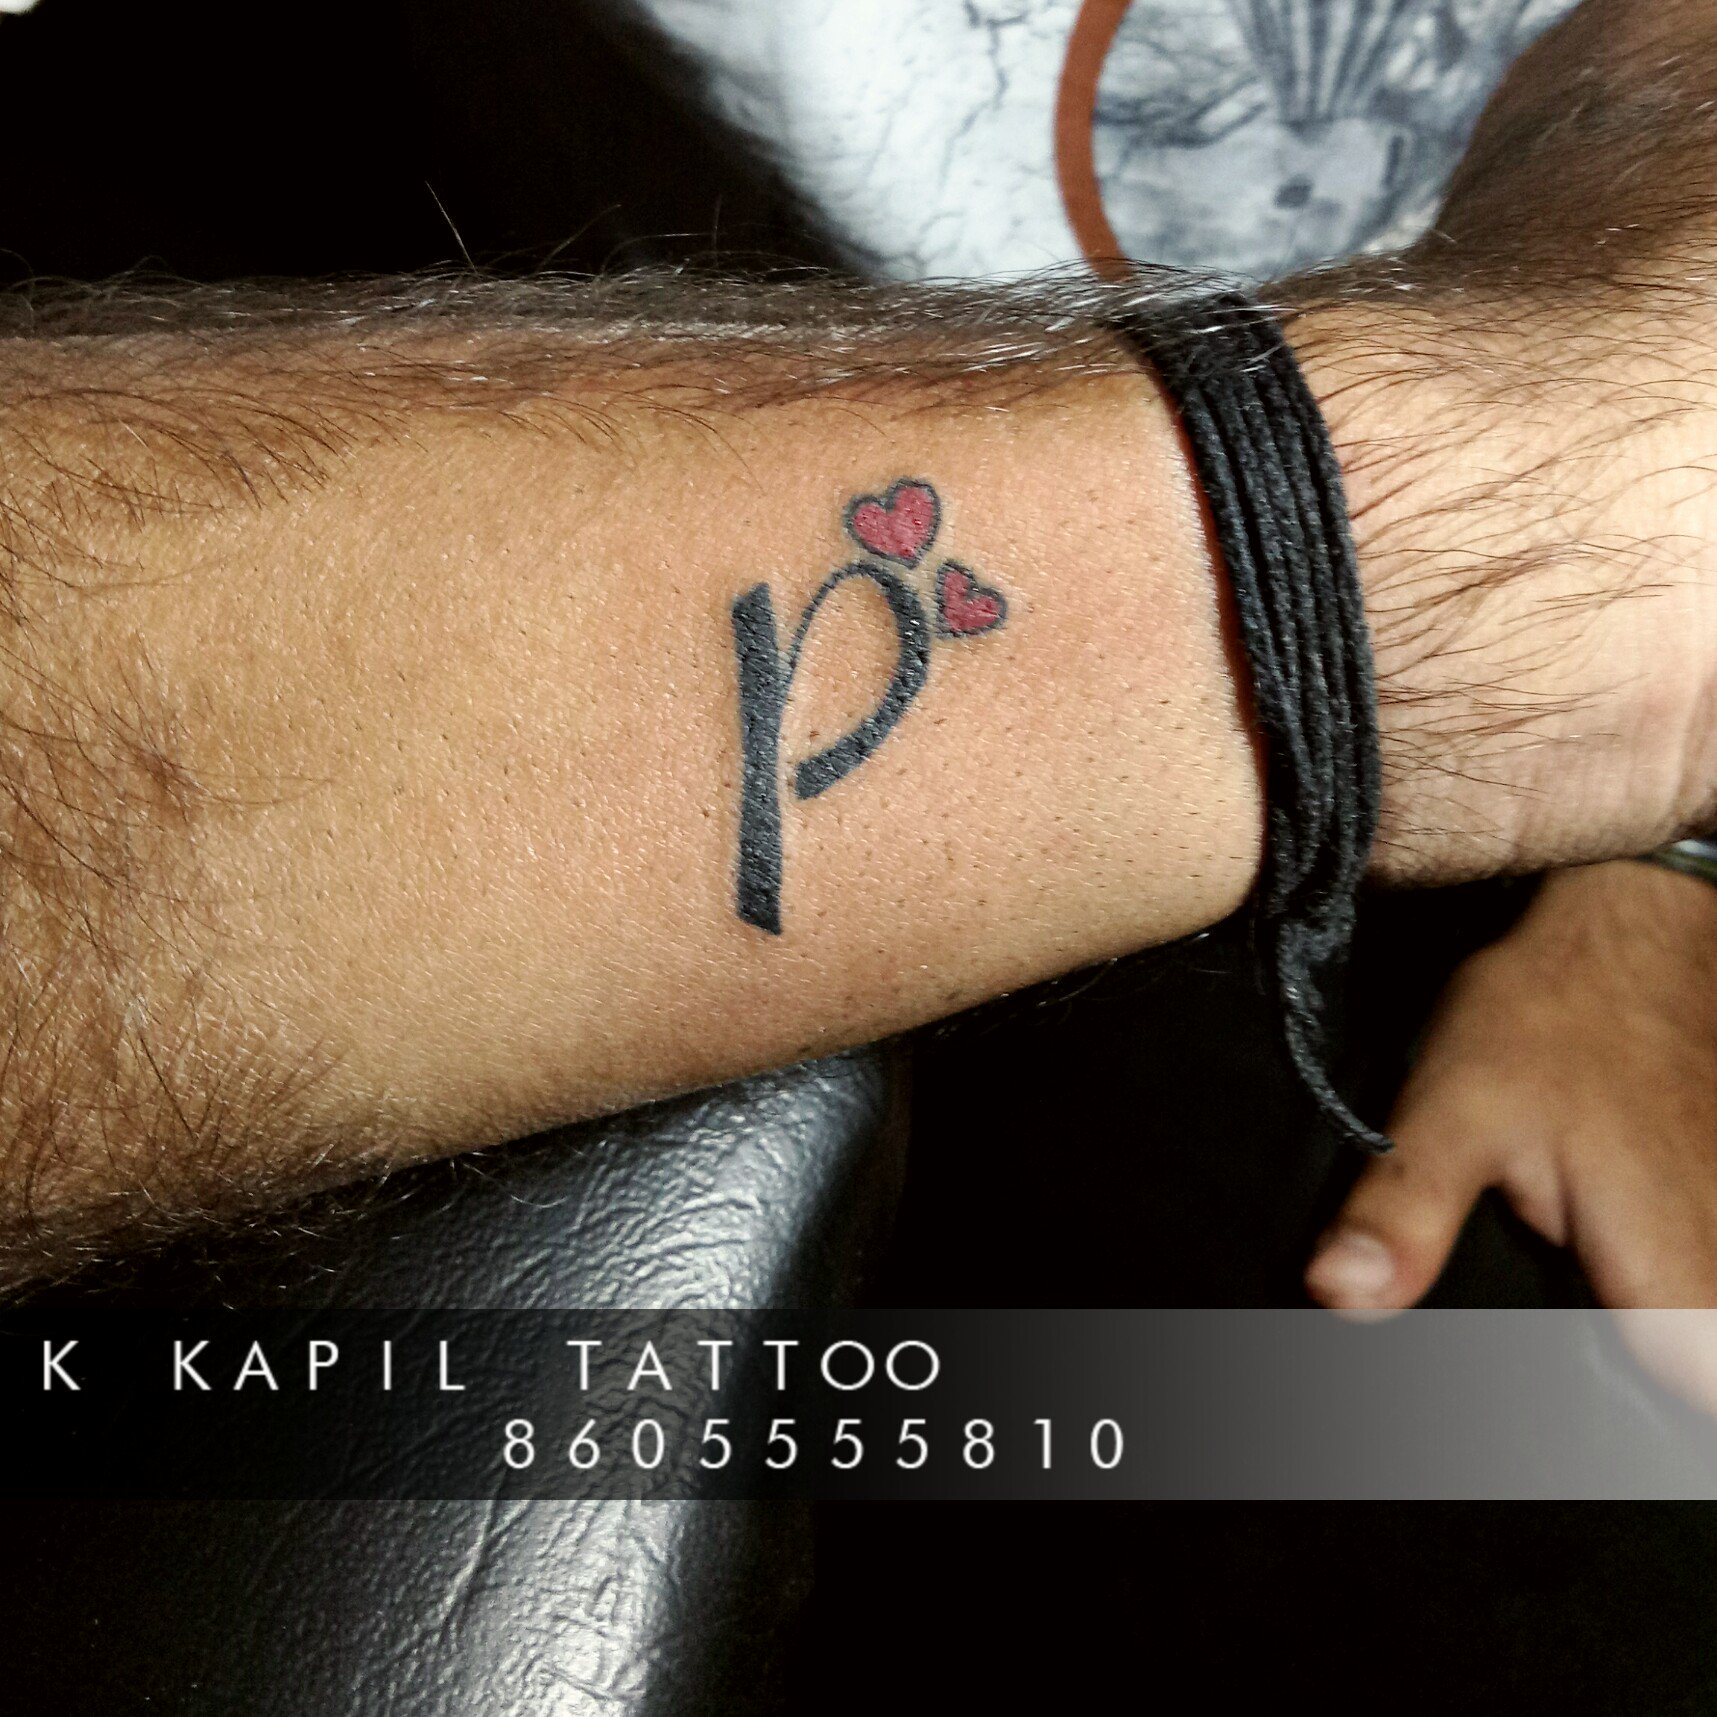 P Letter Tattoo Designs: 20 Incredible Designs In 2023! | Alphabet tattoo  designs, Tattoo designs, Tattoo lettering